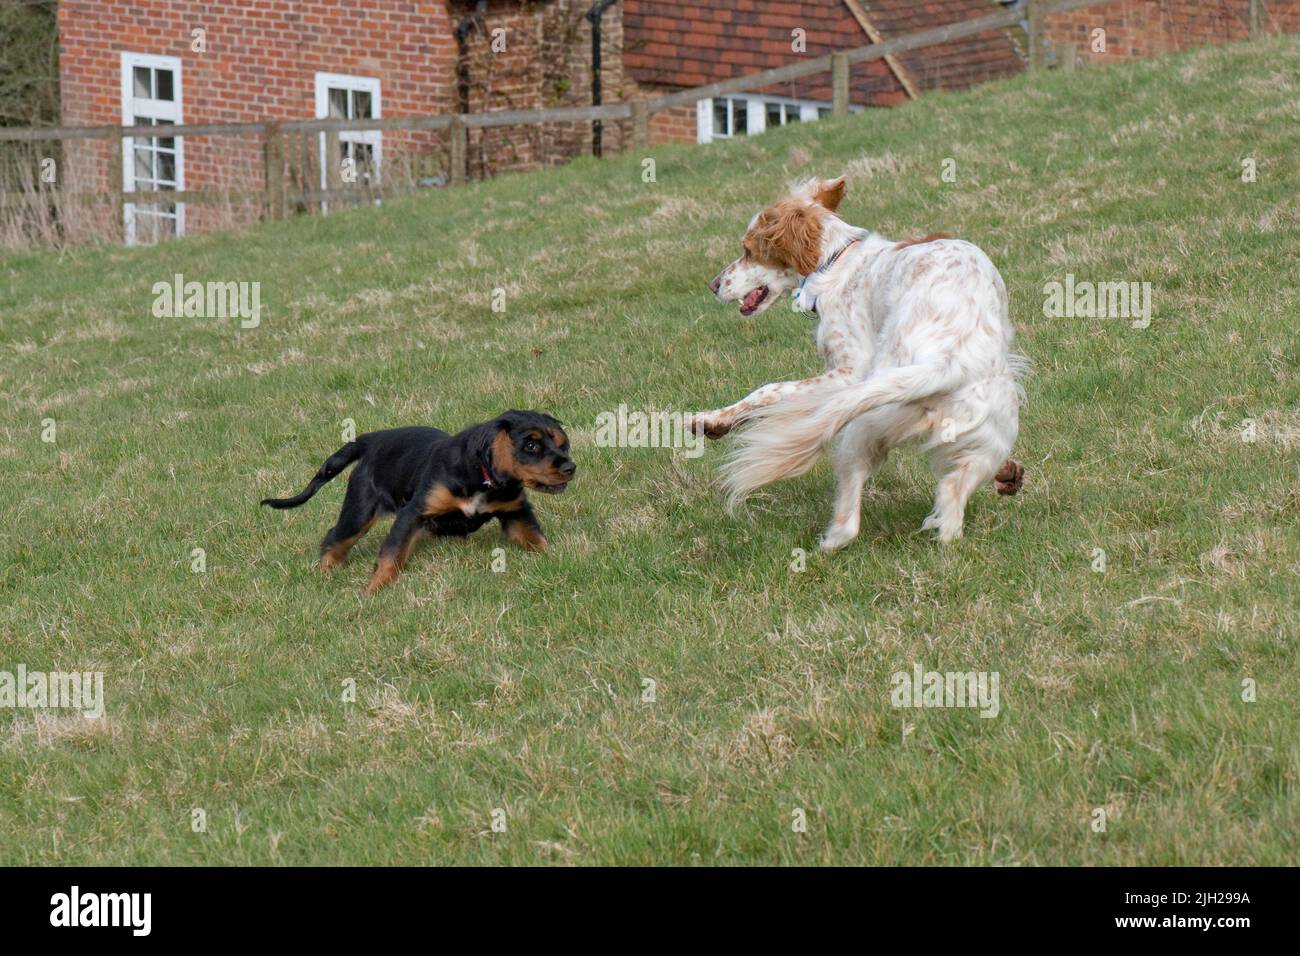 An English setter dog playing with a working cocker spaniel puppy and having fun despite their size and age difference, Berkshire, April Stock Photo